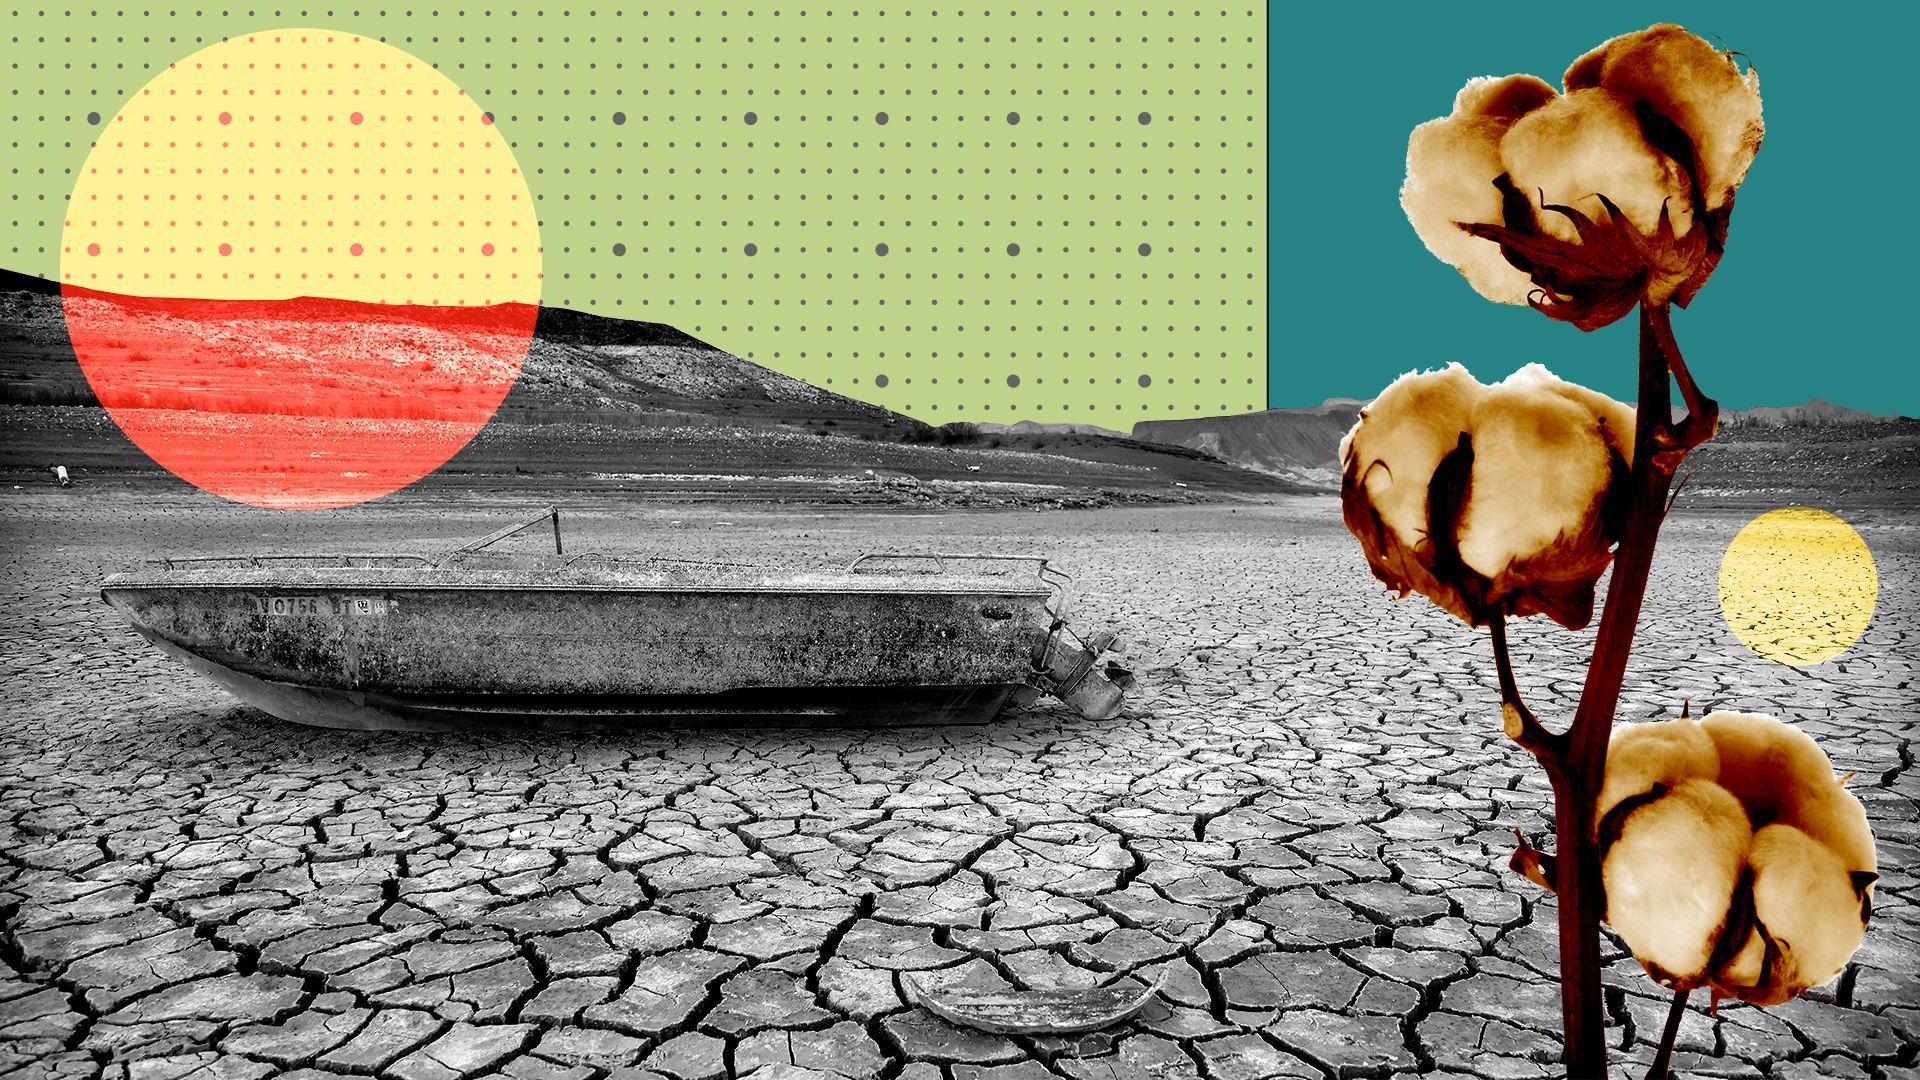 Photo illustration of a dried out section of Lake Mead with a cotton plant and abstract shapes.